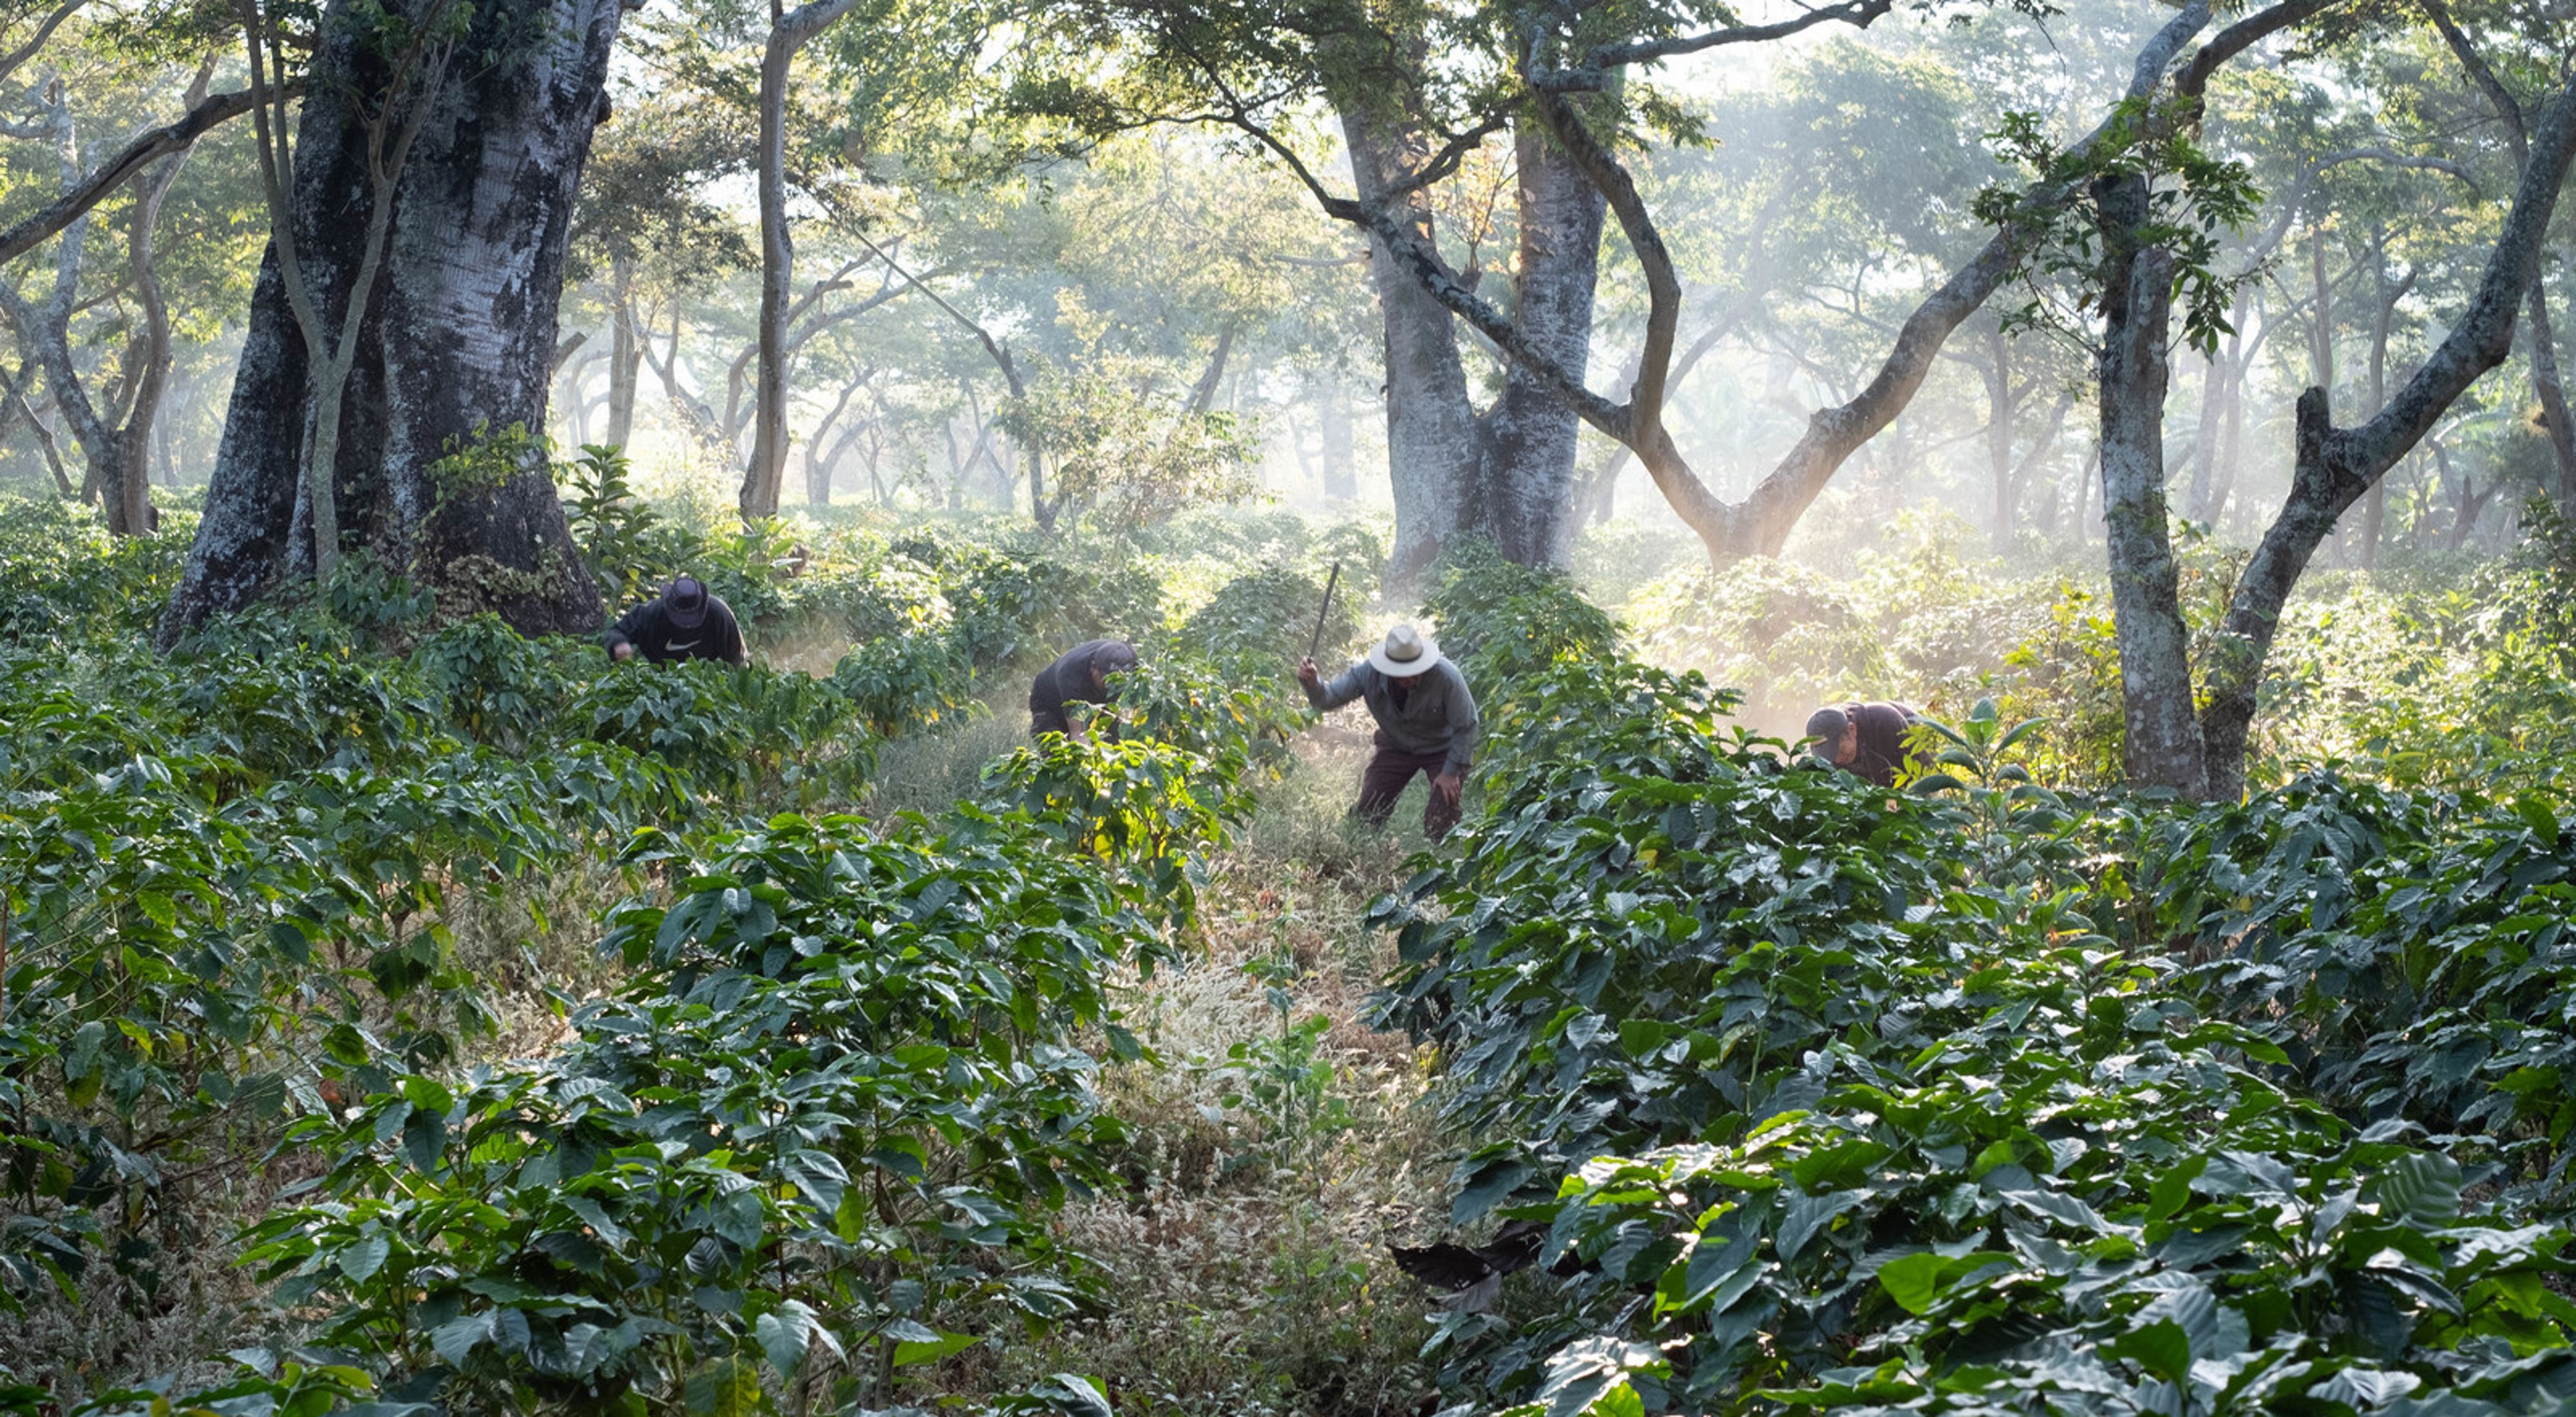 Workers clear undergrowth with machetes in shade-grown coffee crops on San Agustín Las Minas coffee plantation.